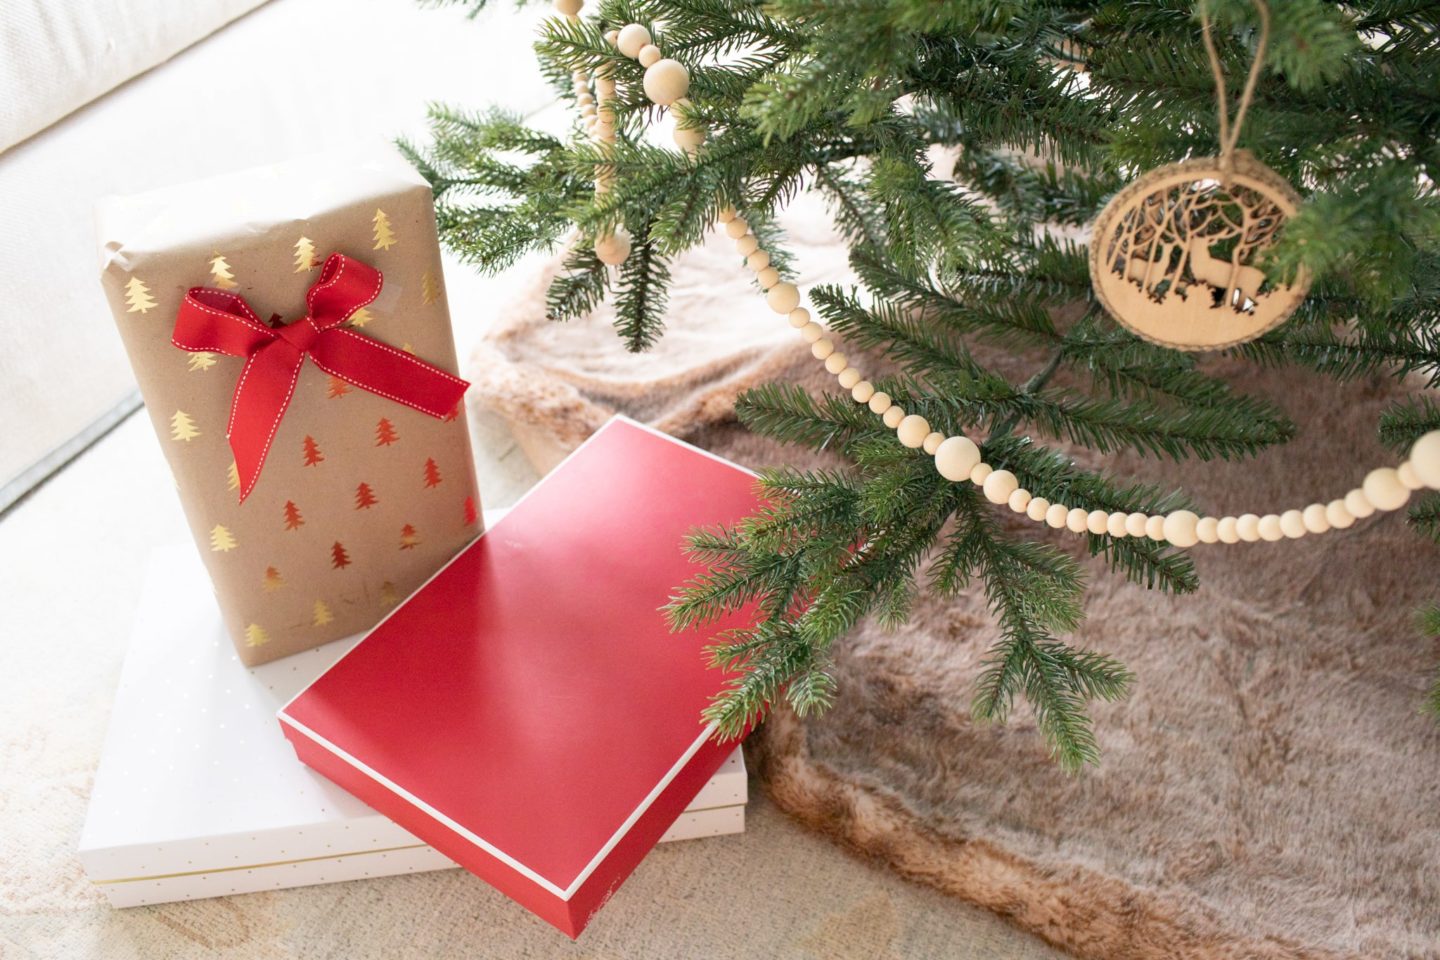 Add that final touch of red under the rustic tree with some red wrapping paper.